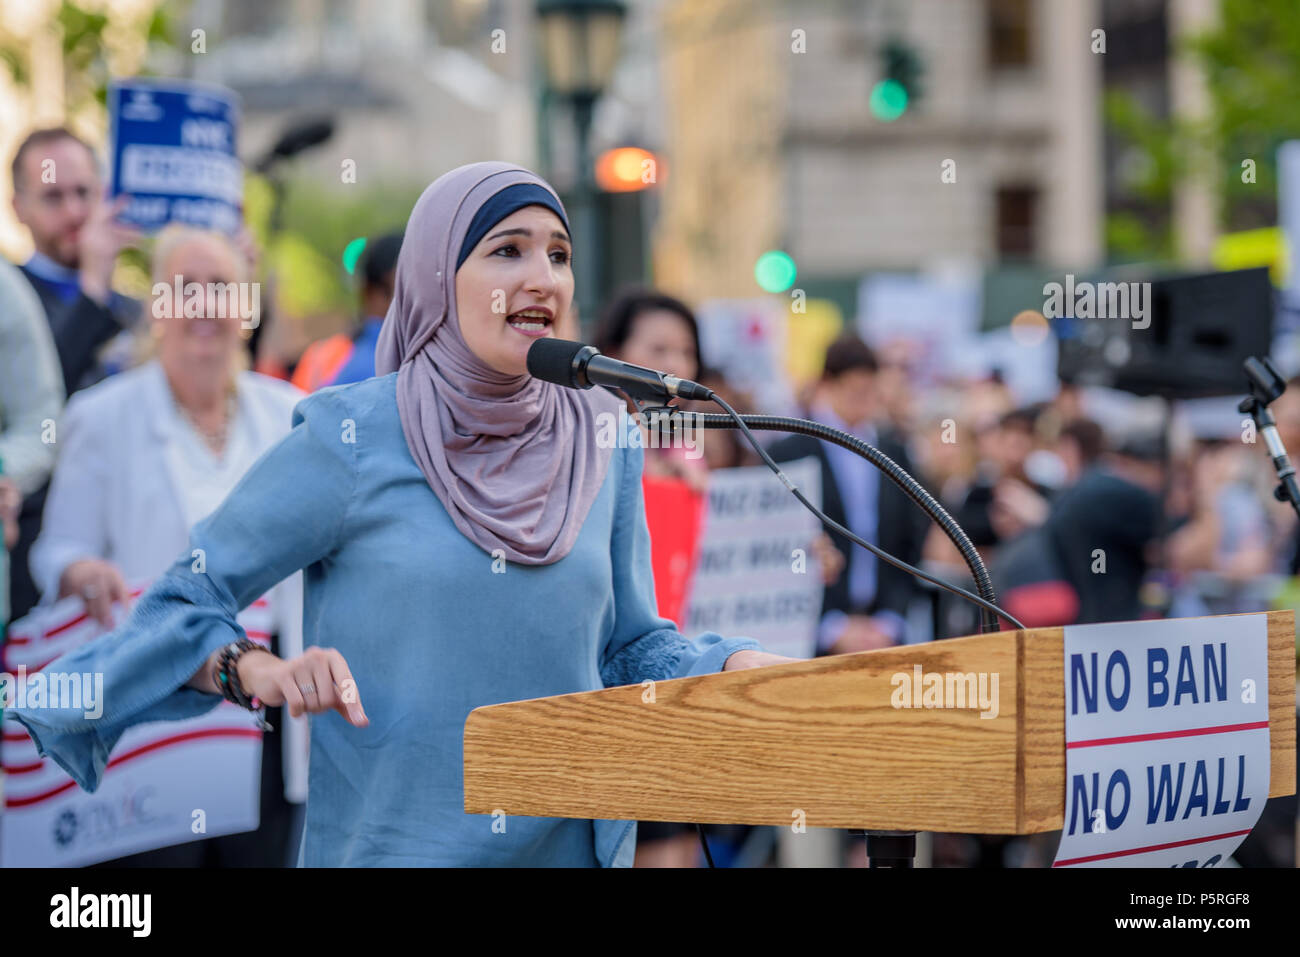 New York, United States. 26th June, 2018. Muslim political activist Linda Sarsour - Over a thousand New Yorkers and immigration rights community organizations gathered at Foley Square in lower Manhattan on June 26, 2018, to rally against the Supreme Court decision announced this morning to uphold the Muslim Ban. The Asian American Federation is calling on its member agencies, advocates and community leaders, allies, and elected officials to stand together in solidarity. Credit: Erik McGregor/Pacific Press/Alamy Live News Stock Photo